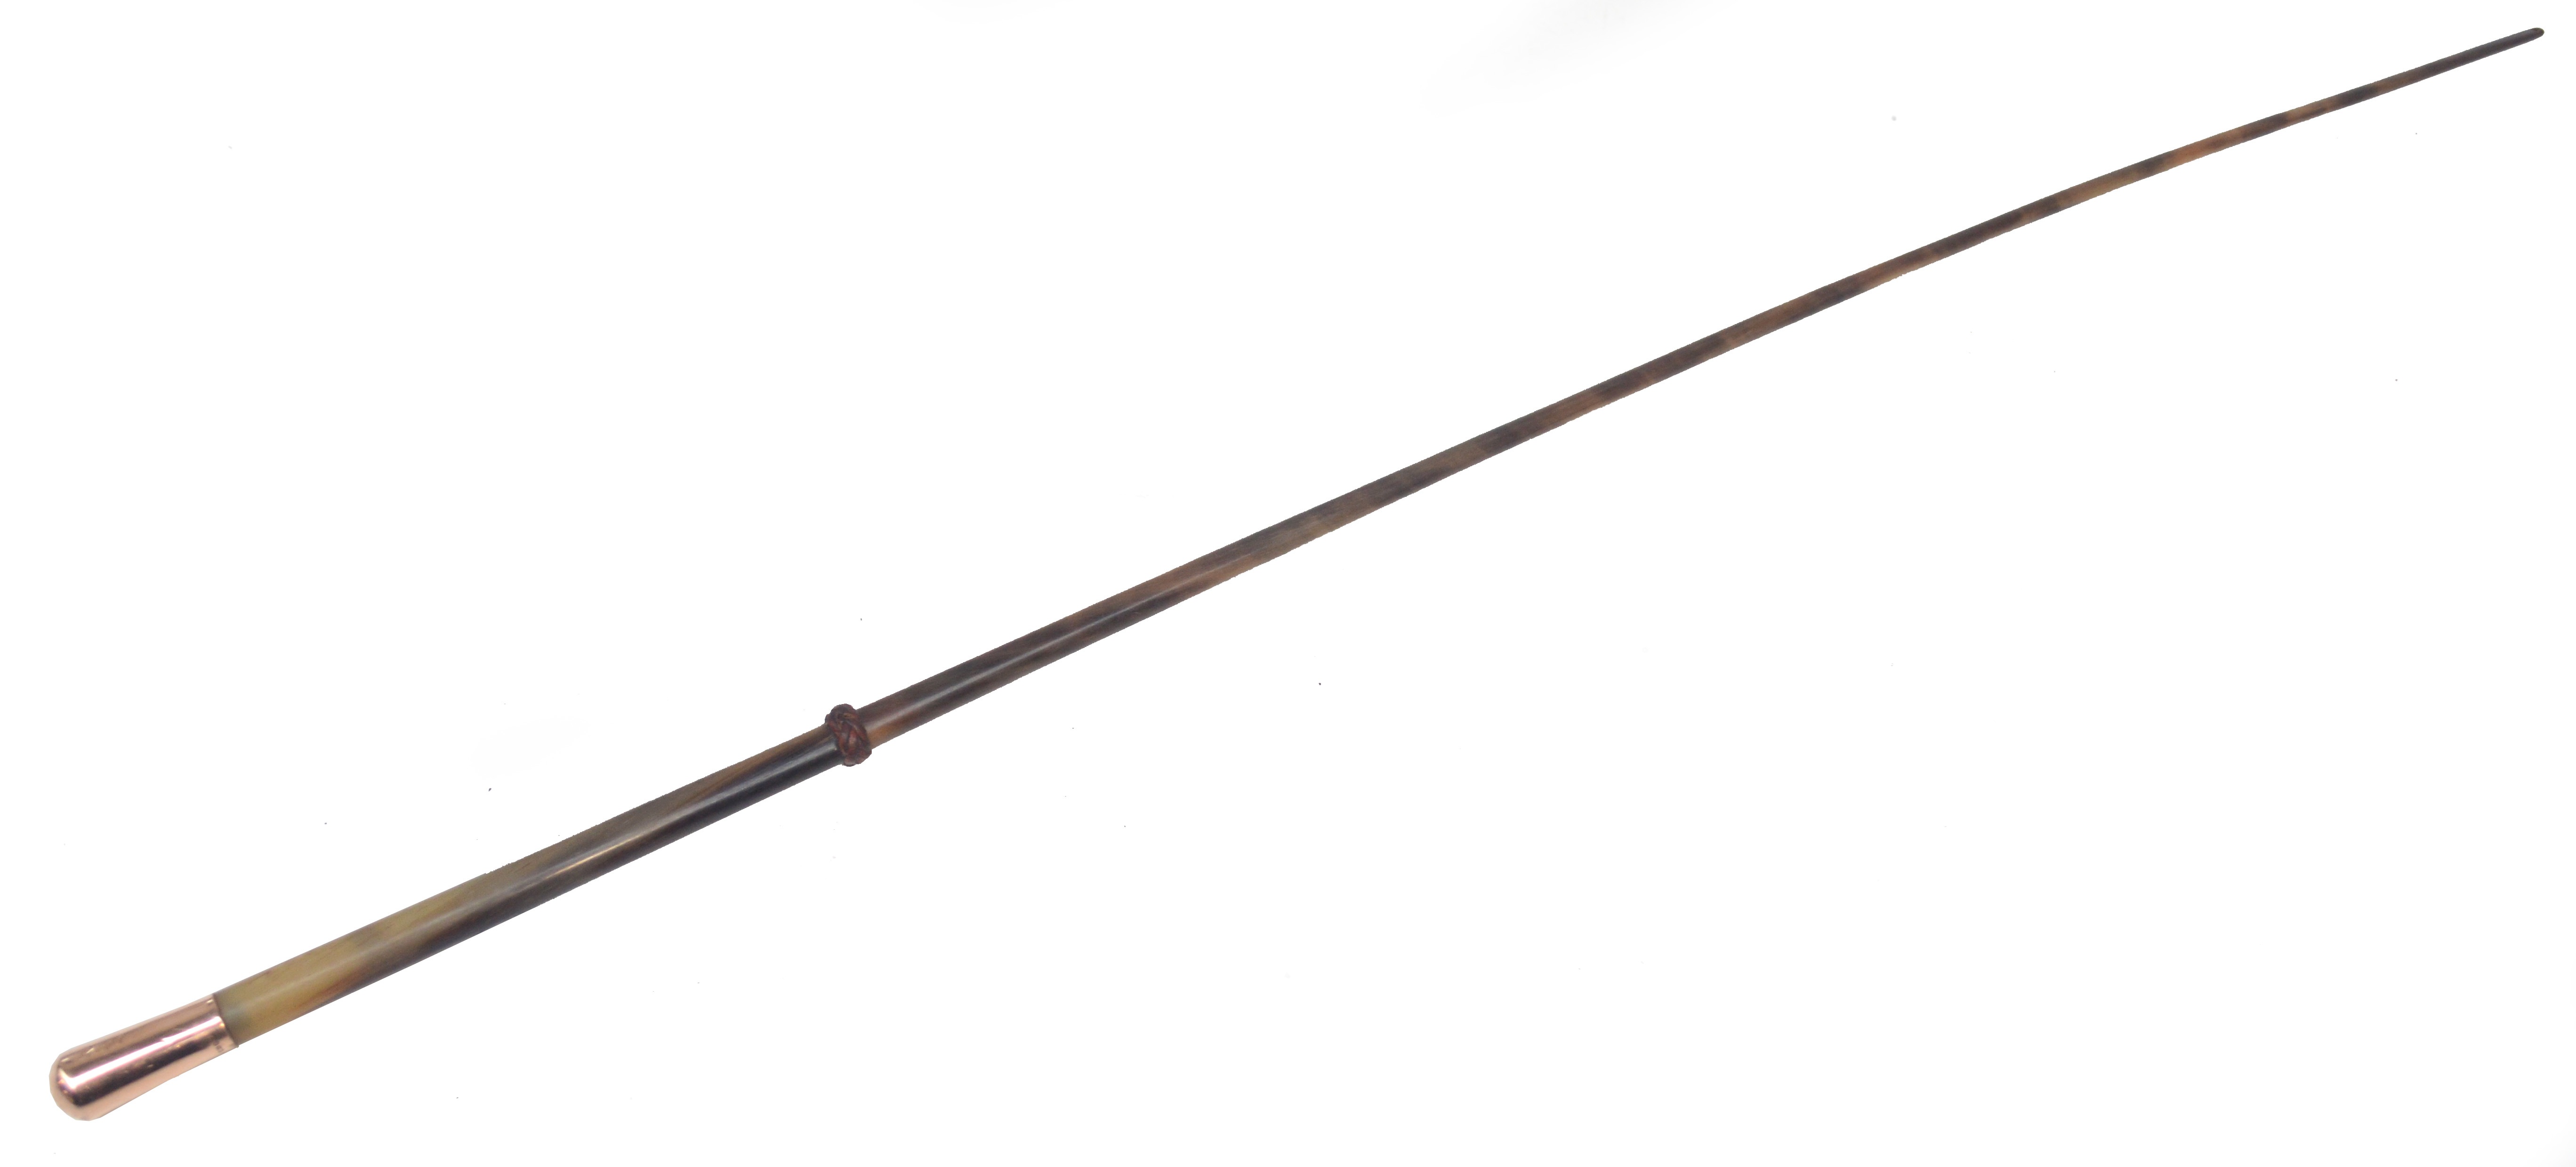 An early 20th century rhinoceros horn riding whip with 9ct gold handle, hallmarked for London